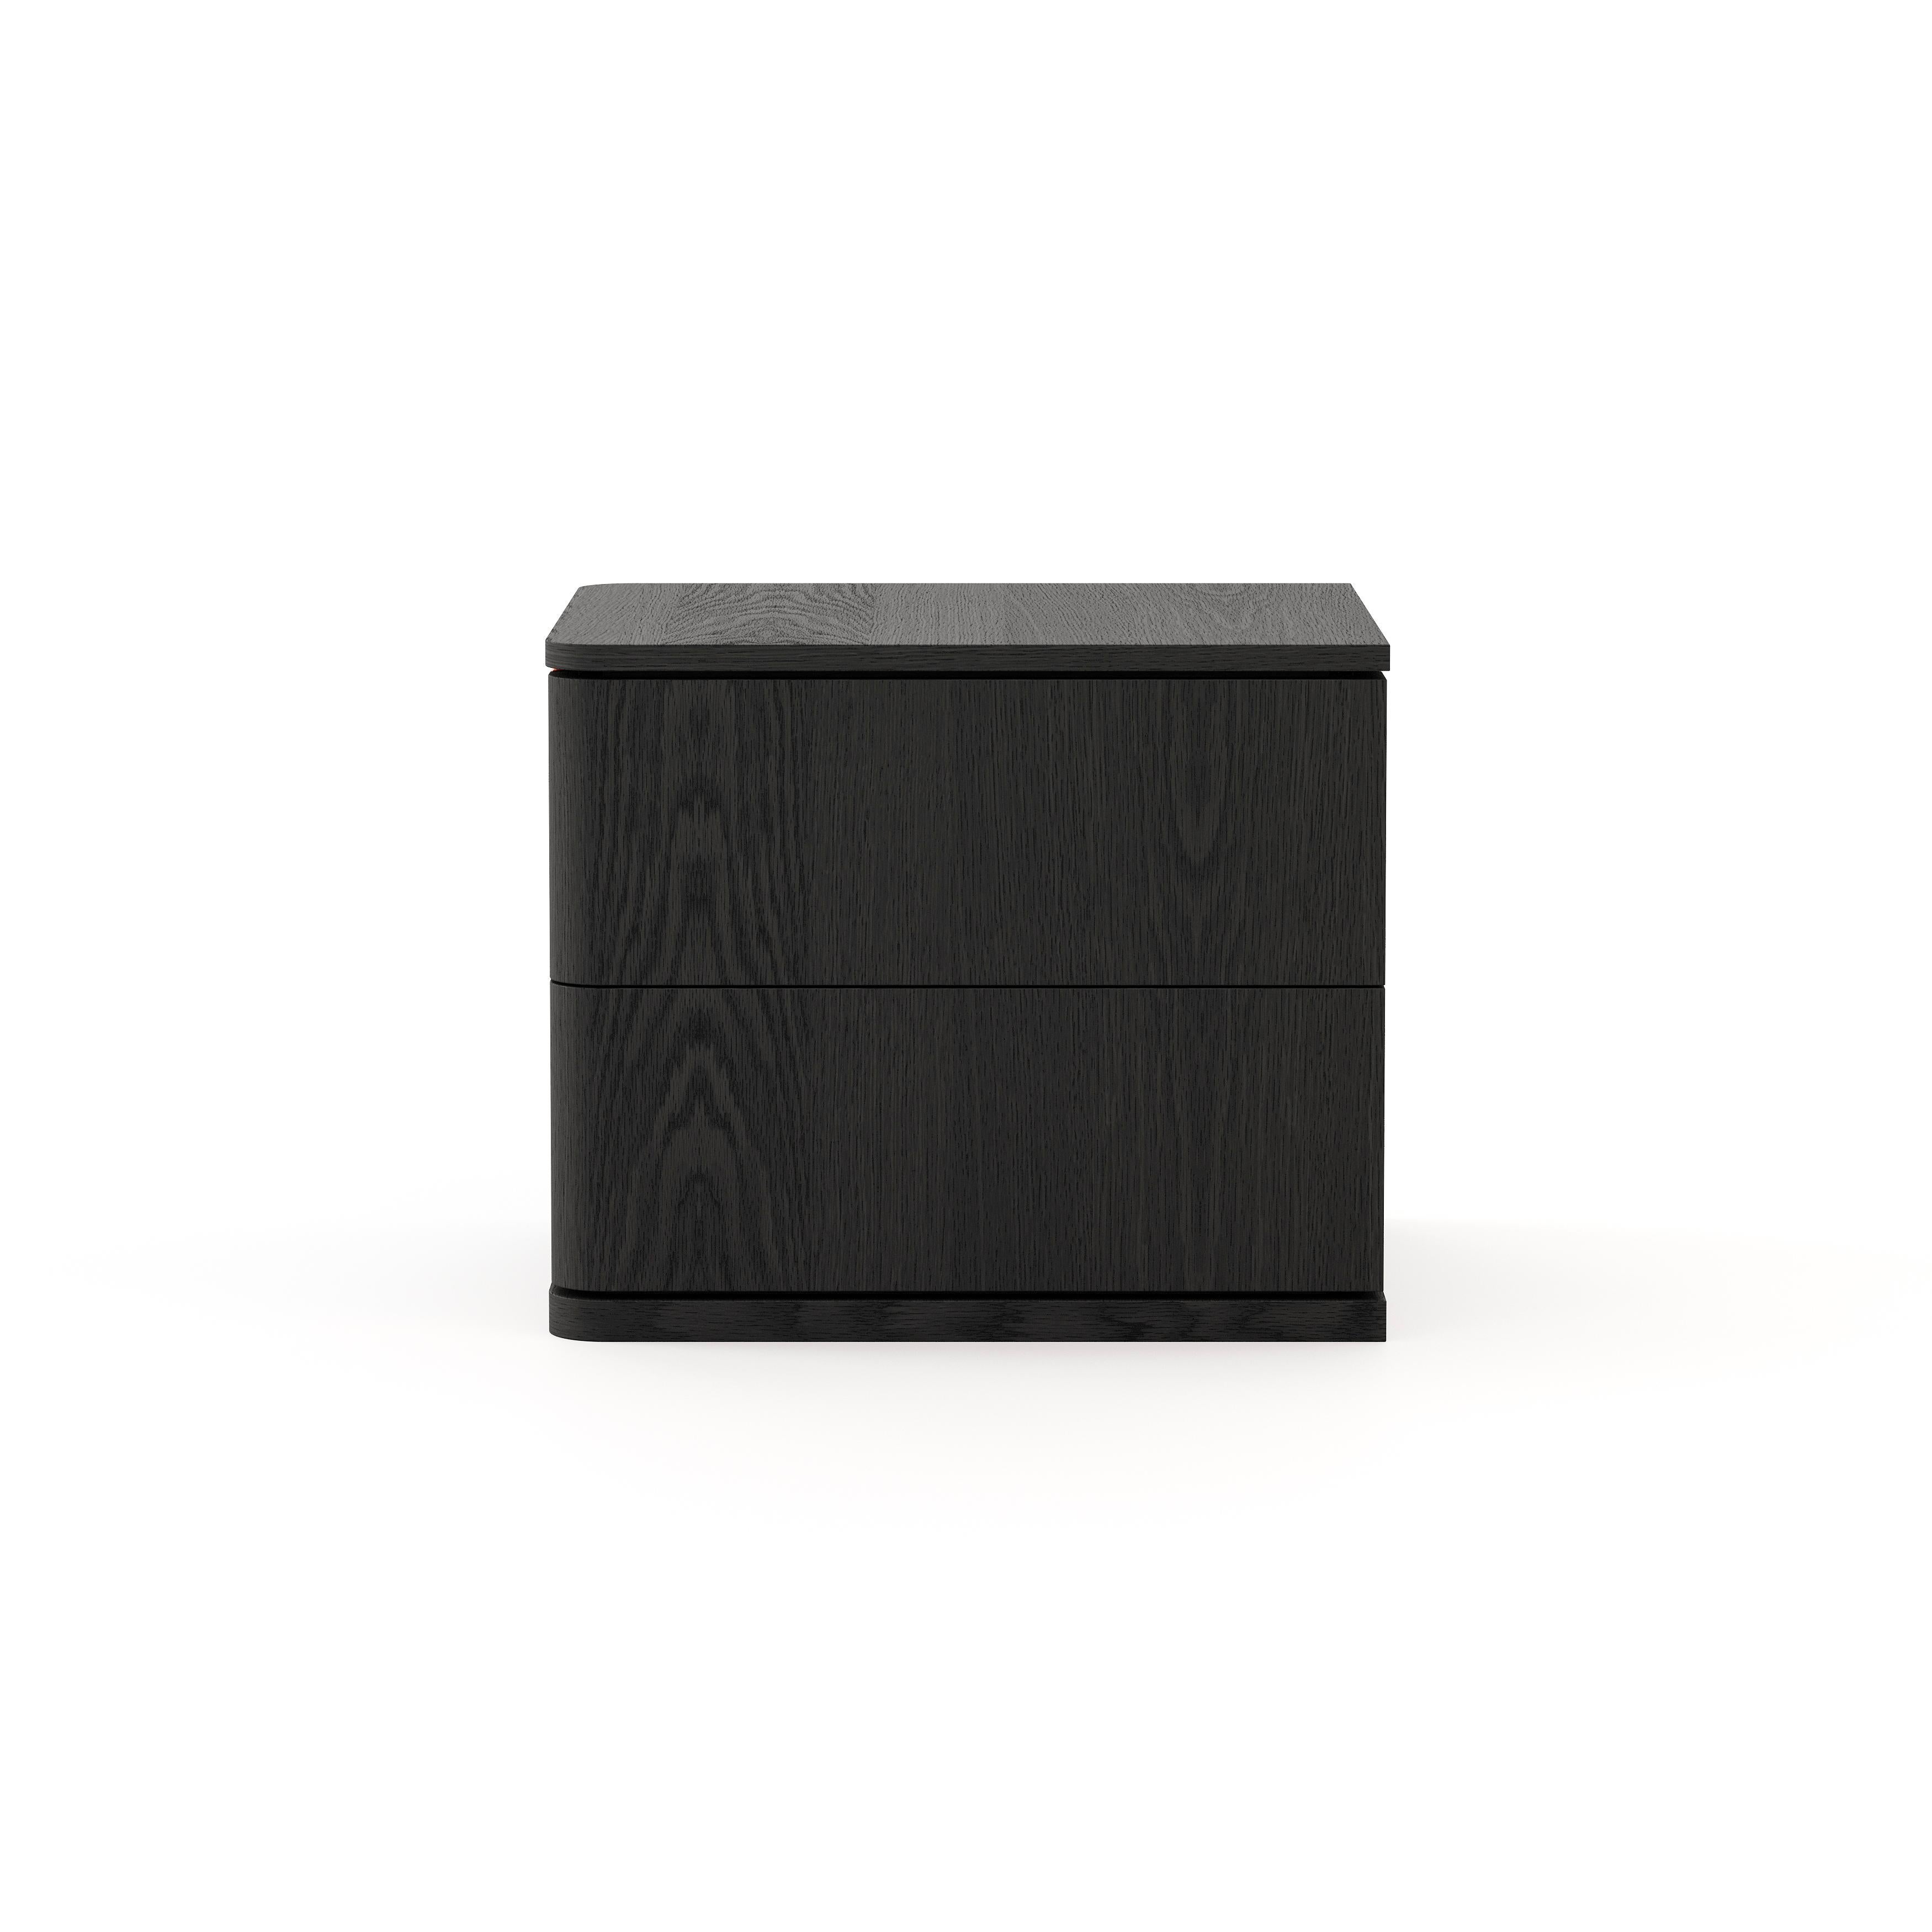 Hilary bedside table by Laskasas is genteel and attractive. This minimal nightstand is perfect for simple and functional Scandi-style bedrooms. A beautifully proportioned piece with drawers made of dark wood.

* Available in different finishes.
**